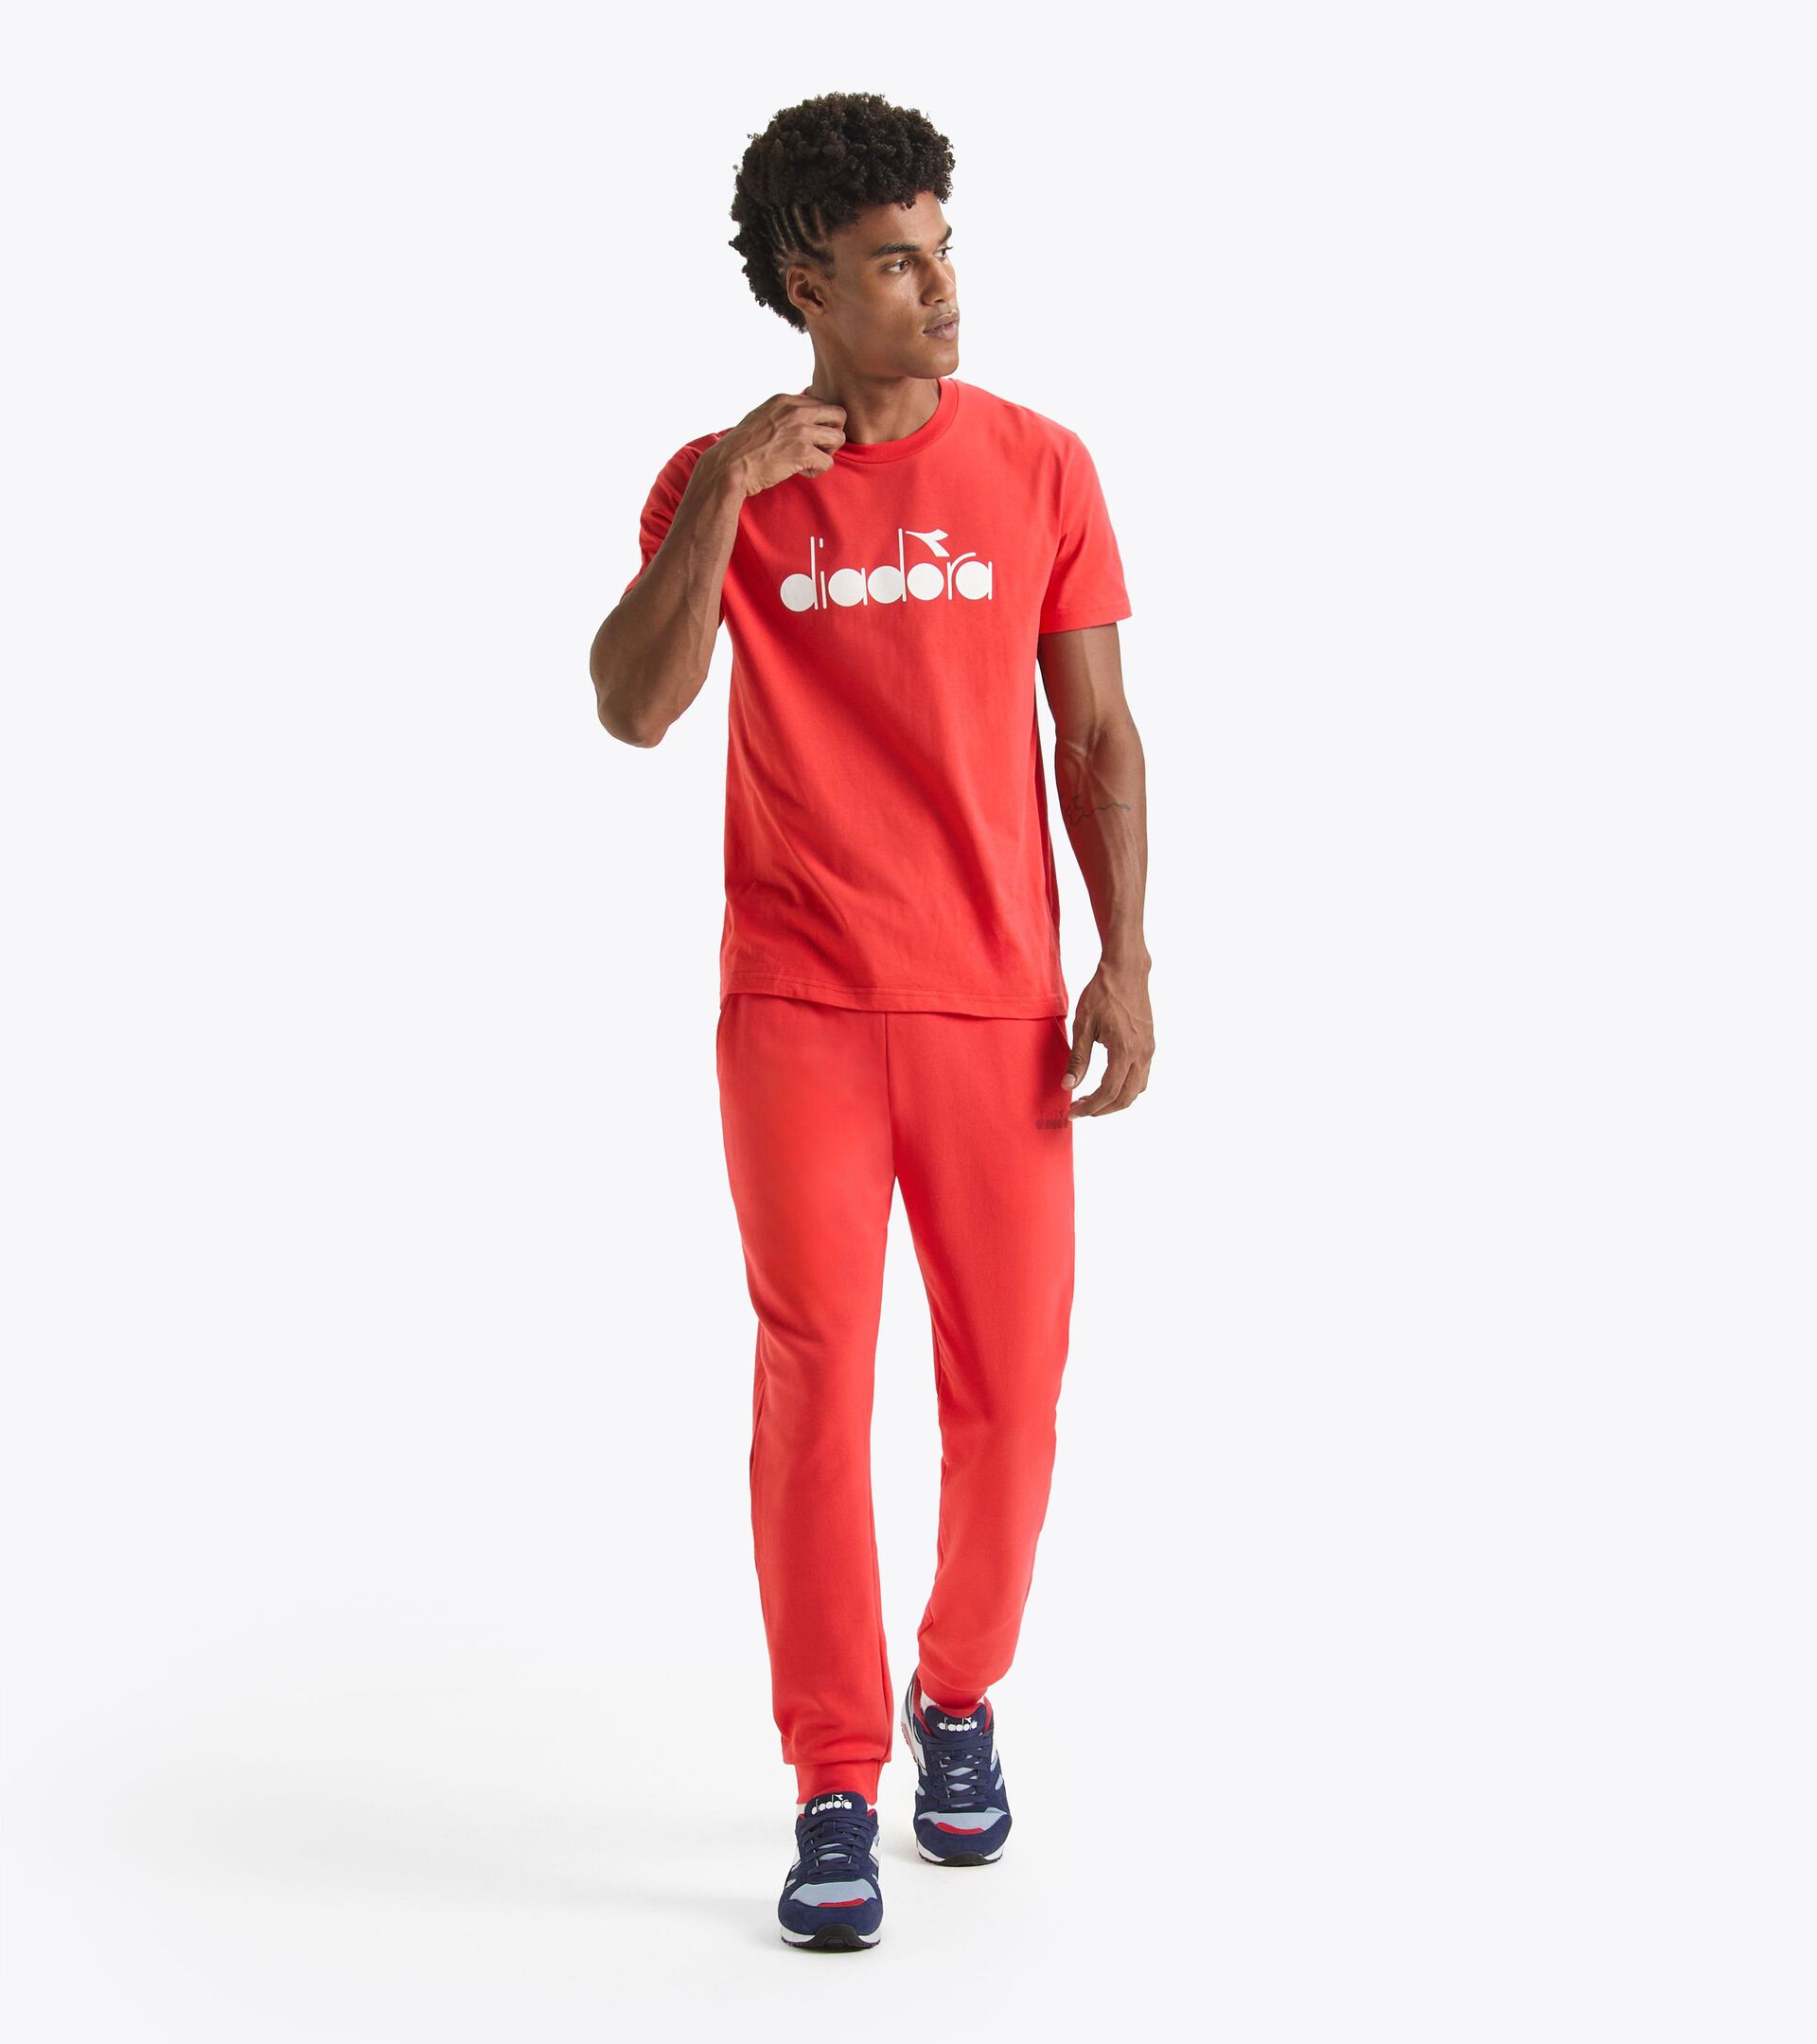 Sporthose - Made in Italy - Gender Neutral PANTS LOGO BITTERSUESS ROT - Diadora